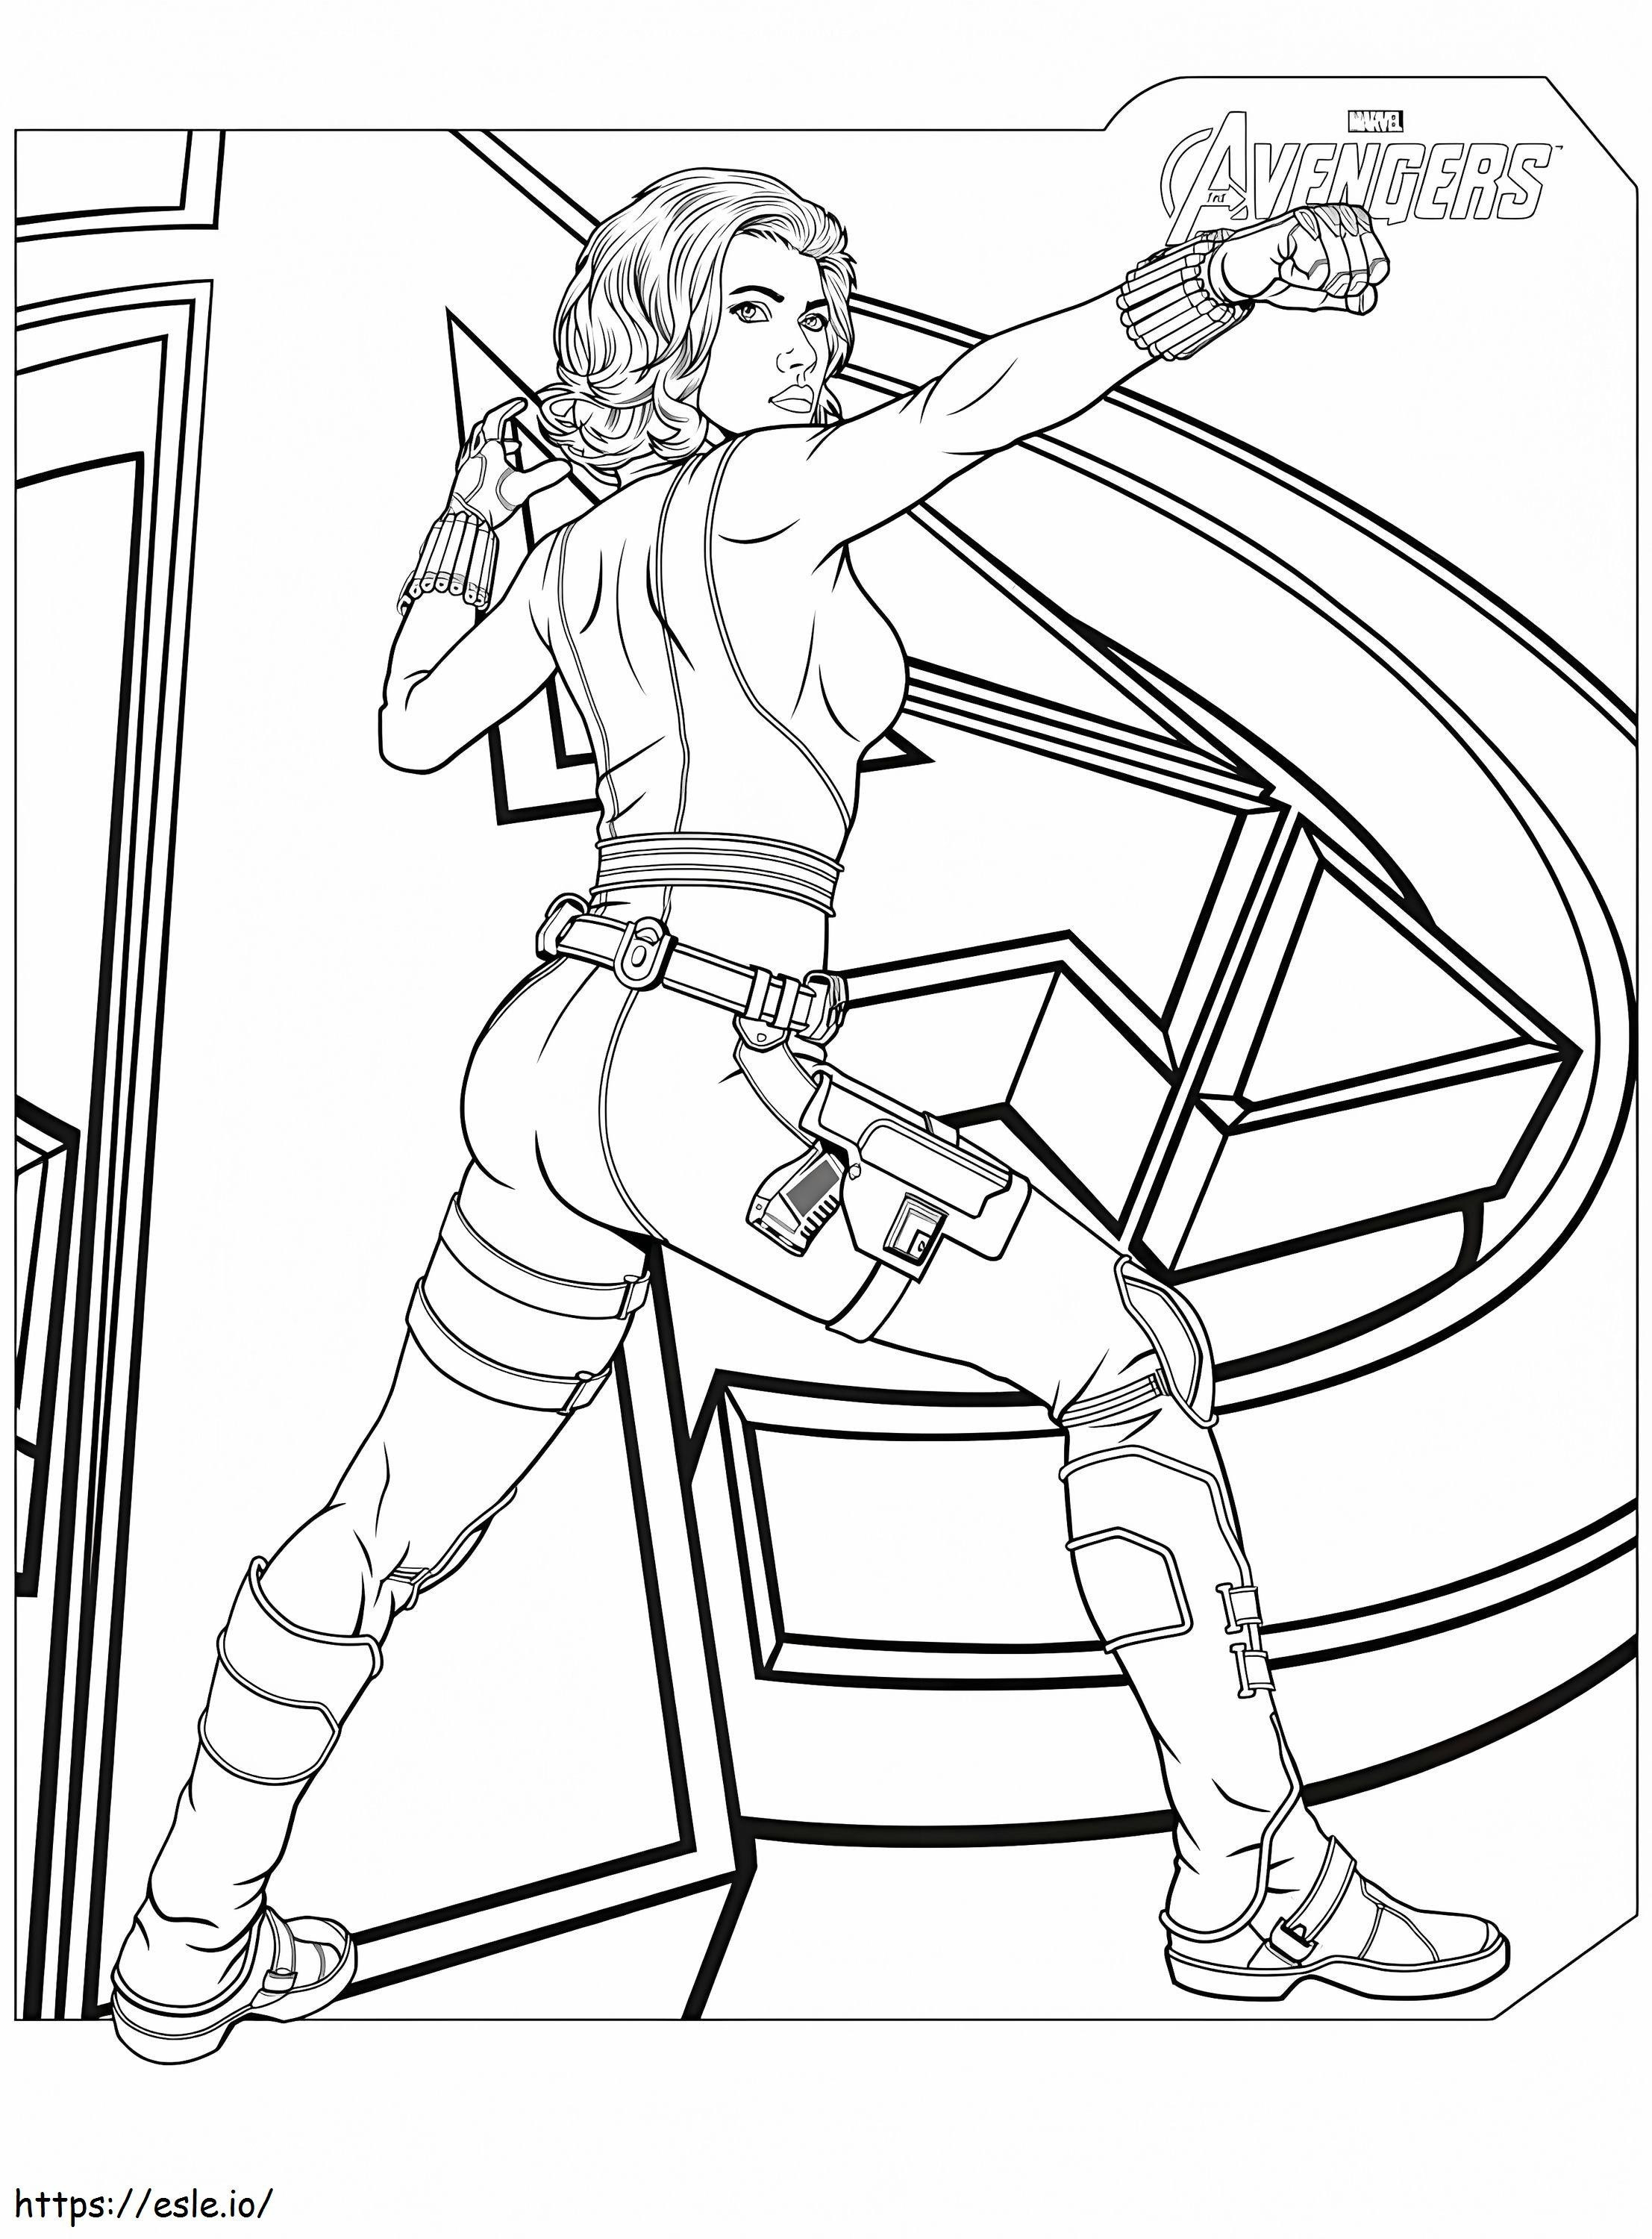 Black Widow 10 coloring page